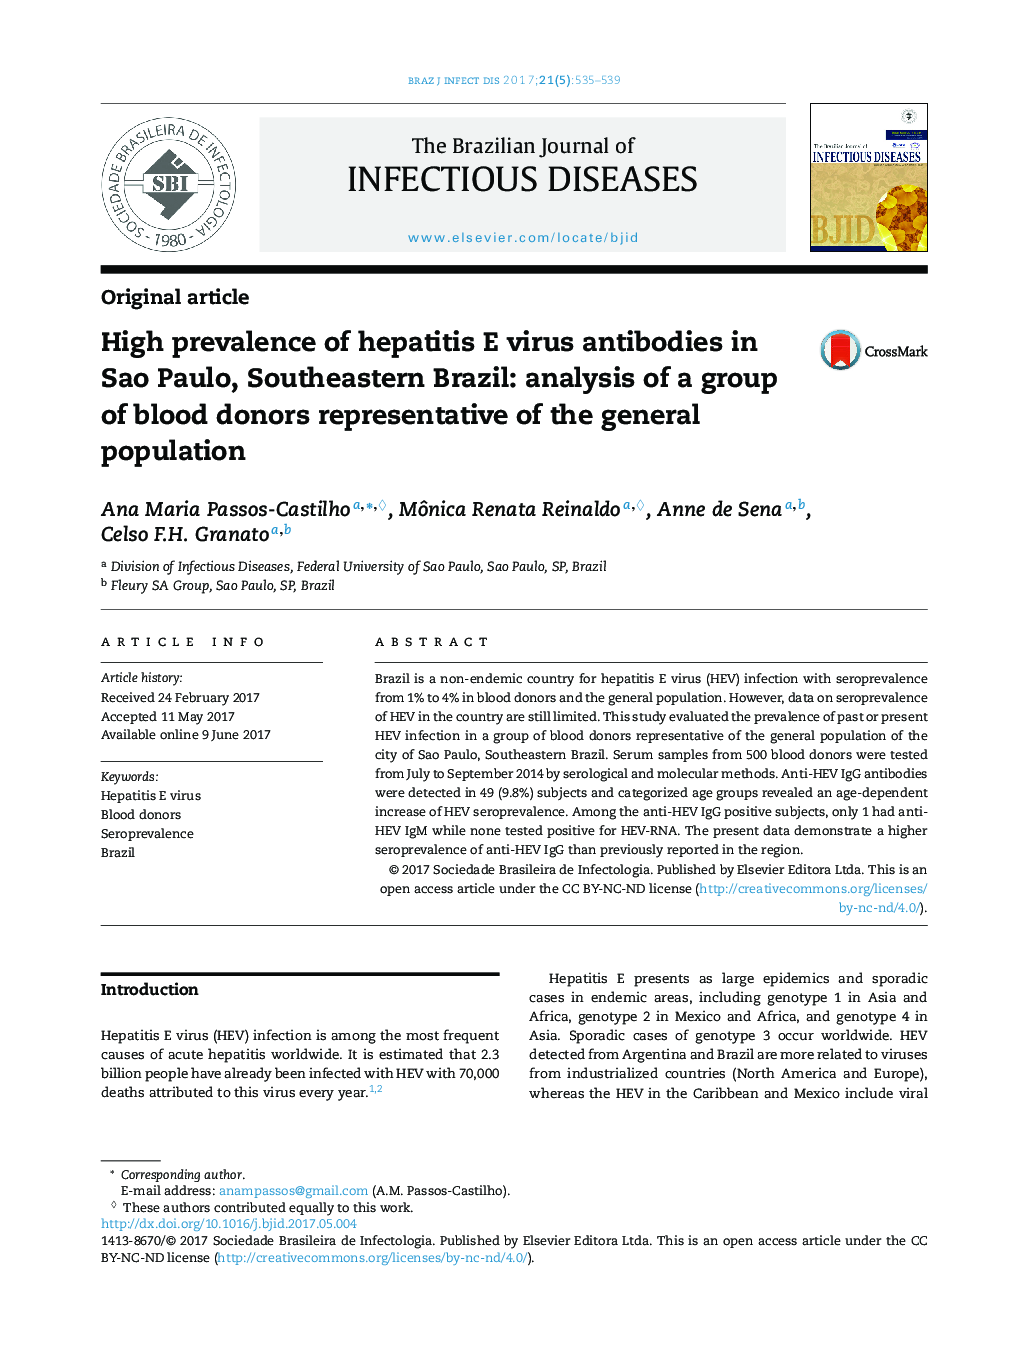 High prevalence of hepatitis E virus antibodies in Sao Paulo, Southeastern Brazil: analysis of a group of blood donors representative of the general population